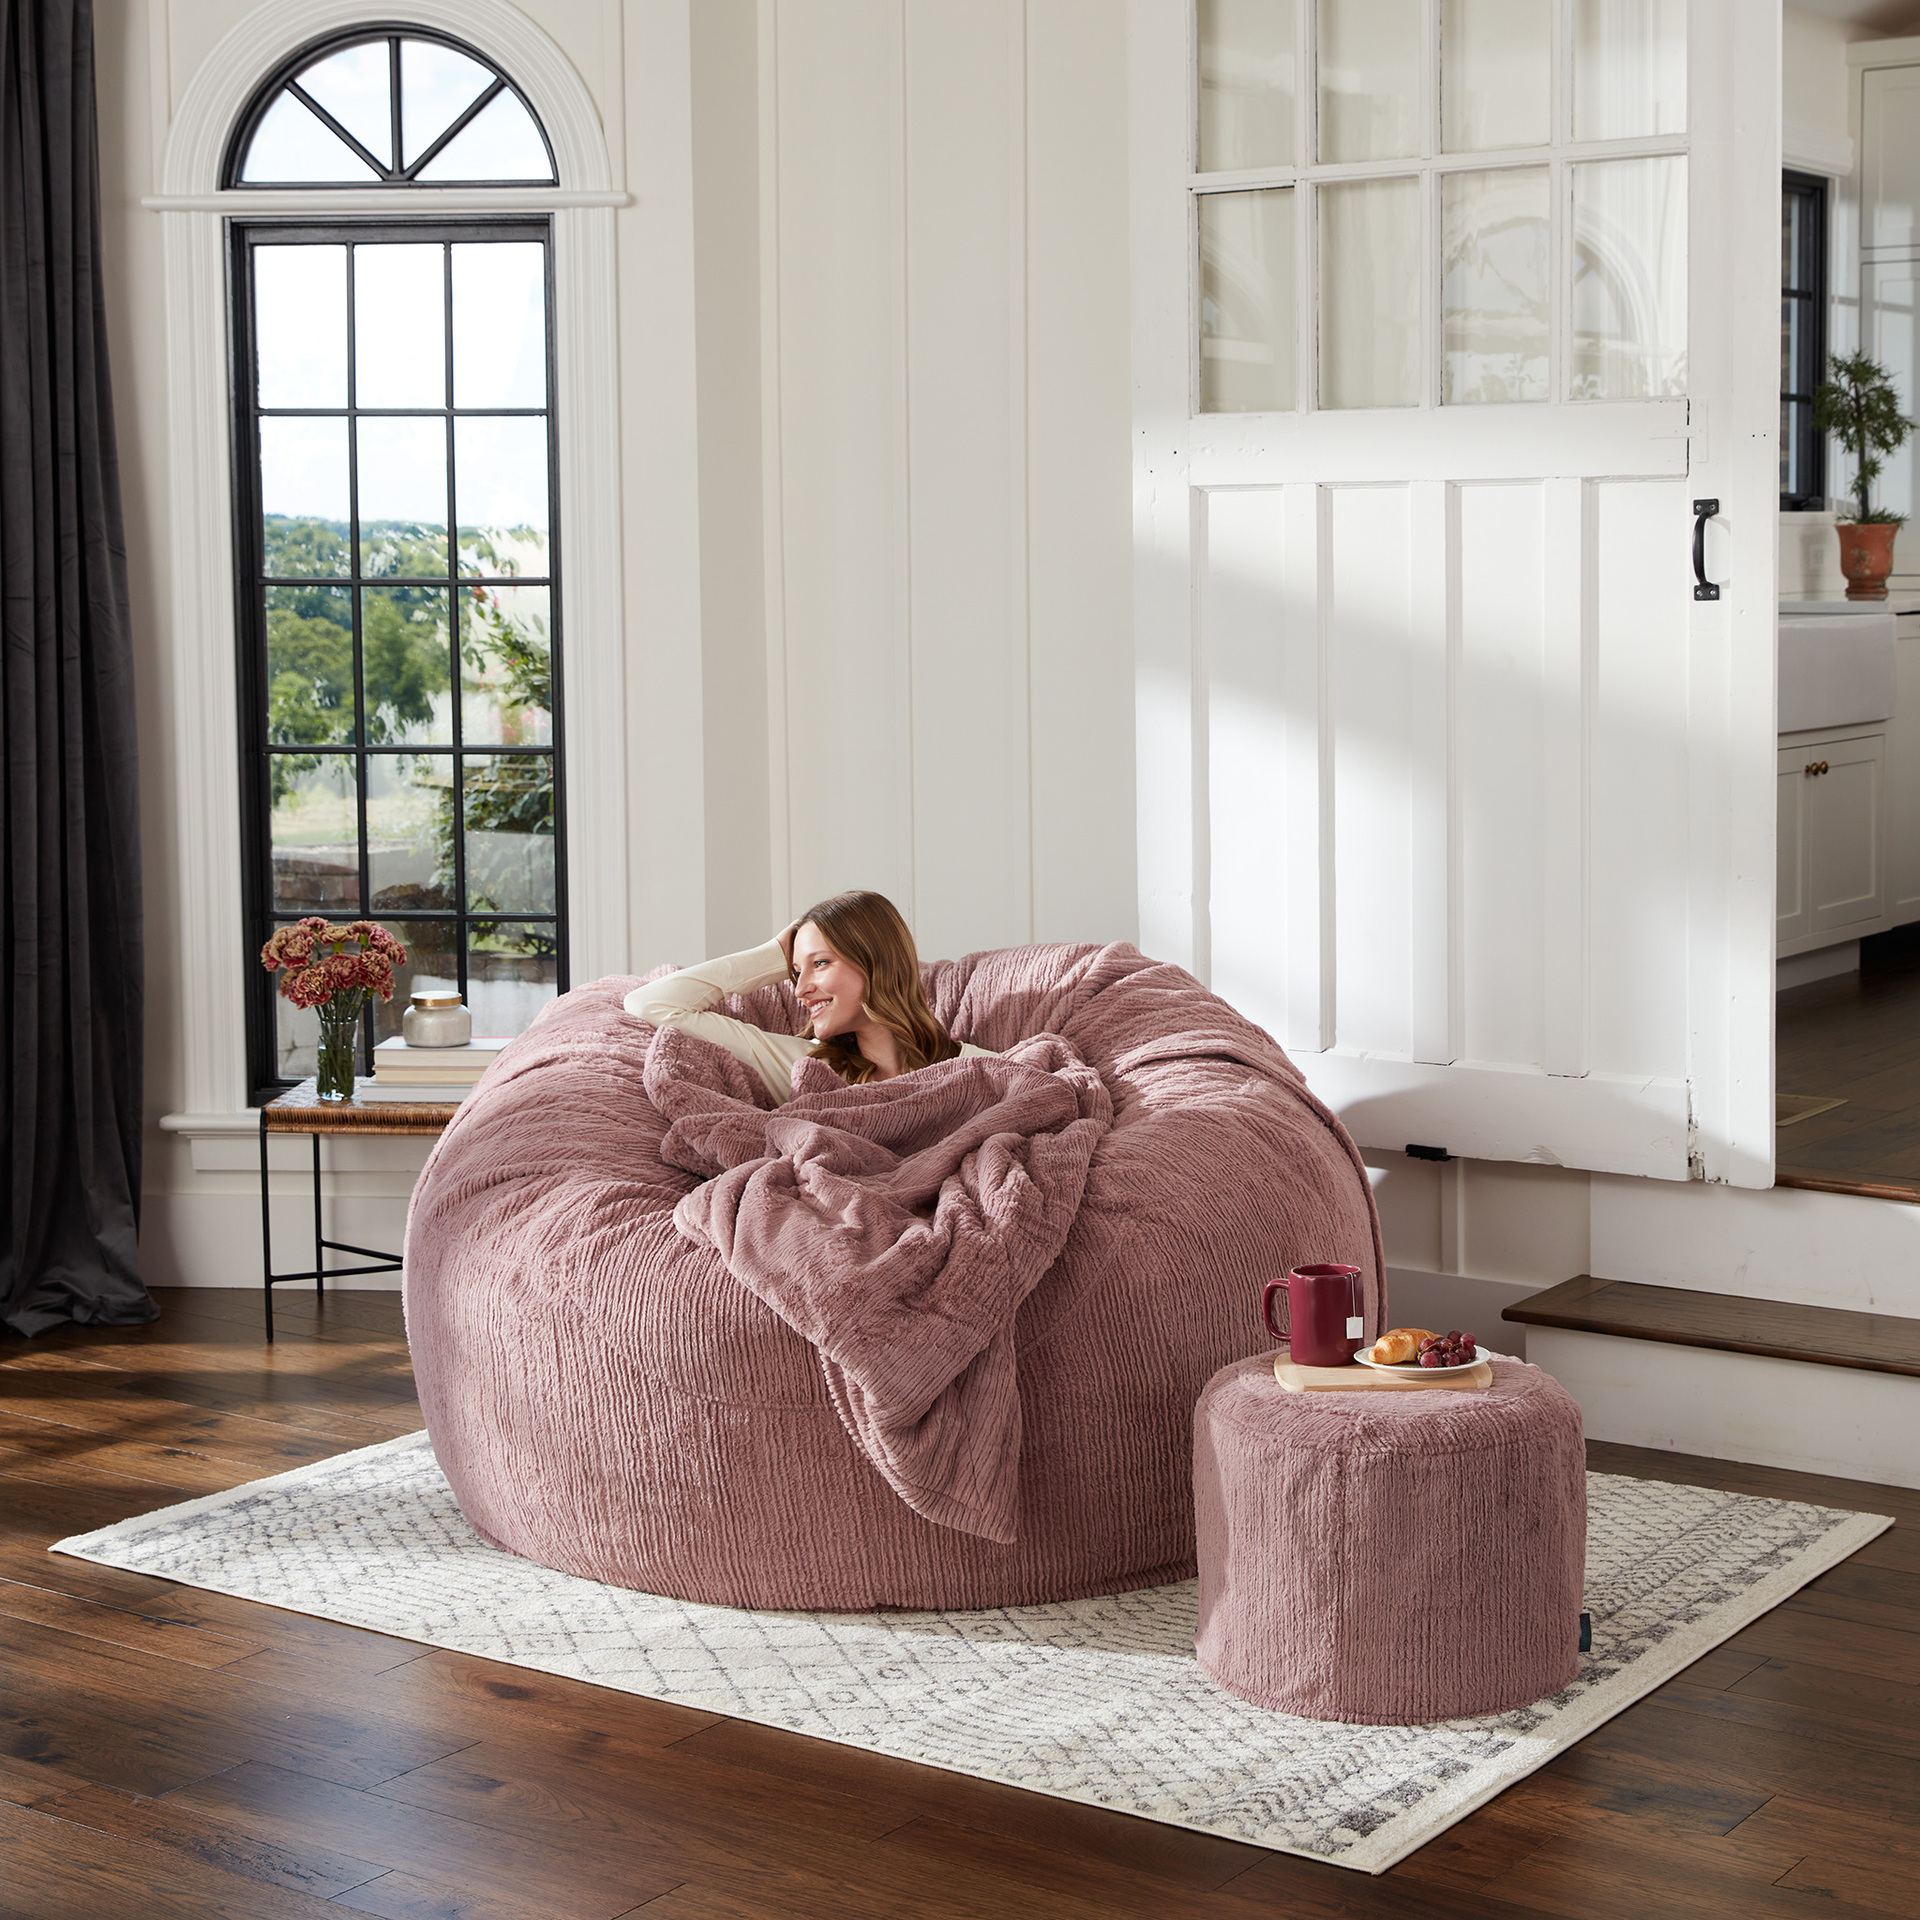 The World’s Most Comfortable Seat LoveSac City Sac Bundle with